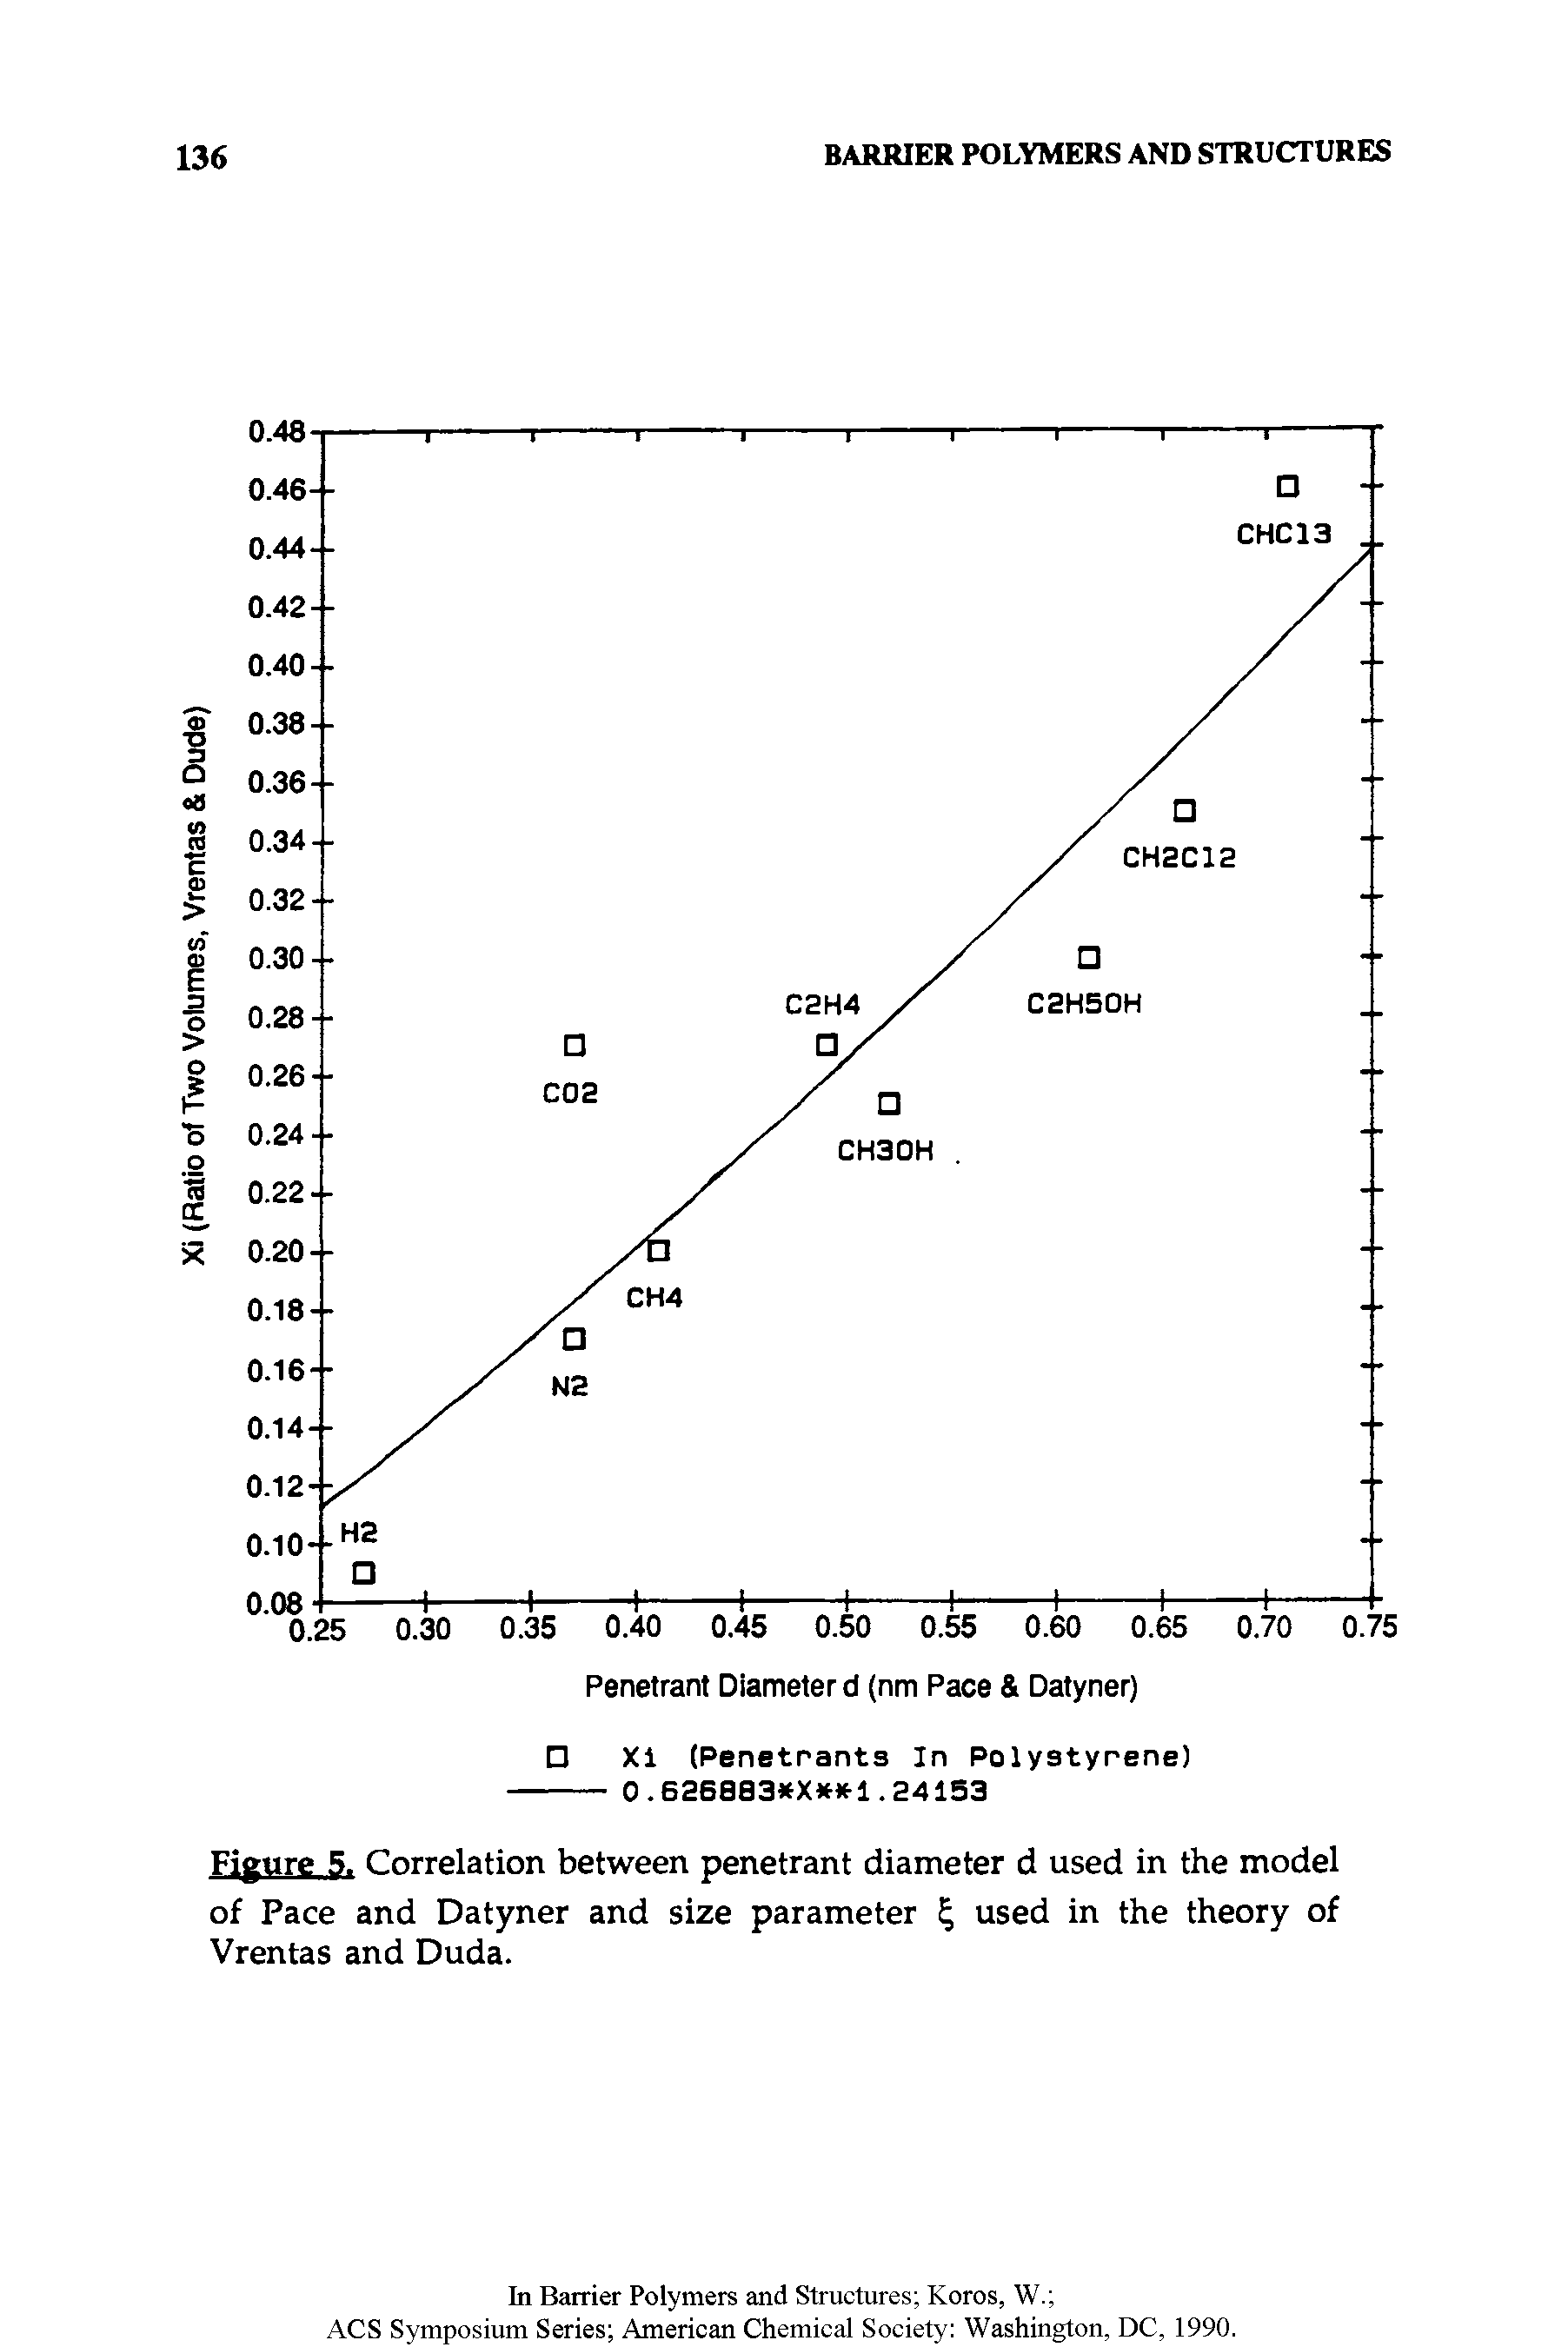 Figure 5. Correlation between penetrant diameter d used in the model of Pace and Datyner and size parameter used in the theory of Vrentas and Duda.